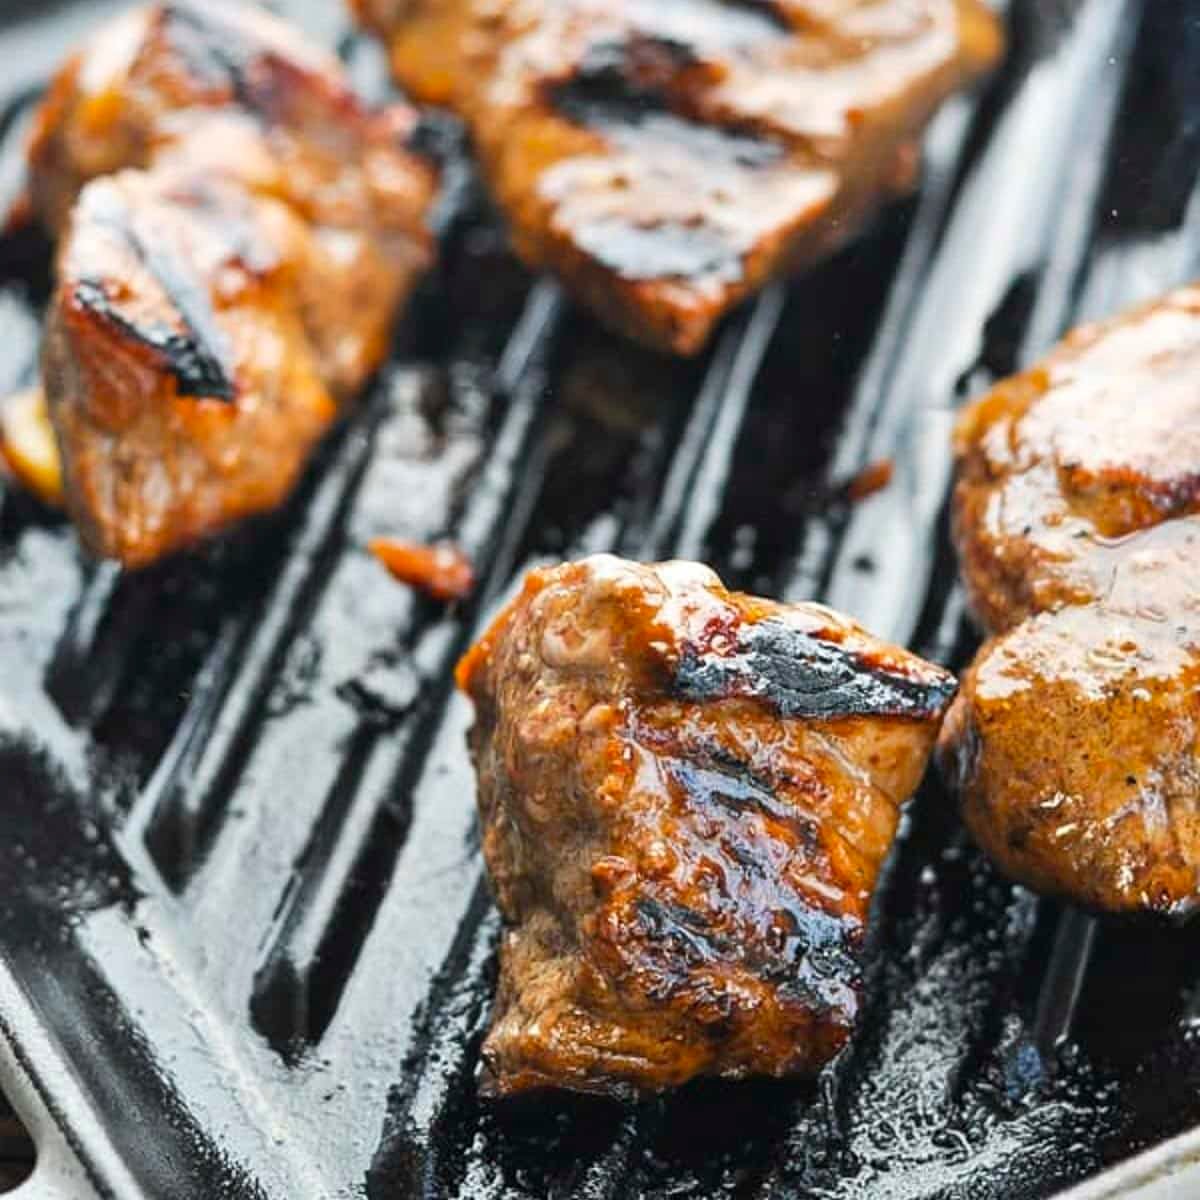 The best steak tips recipe on a cast iron grill pan.